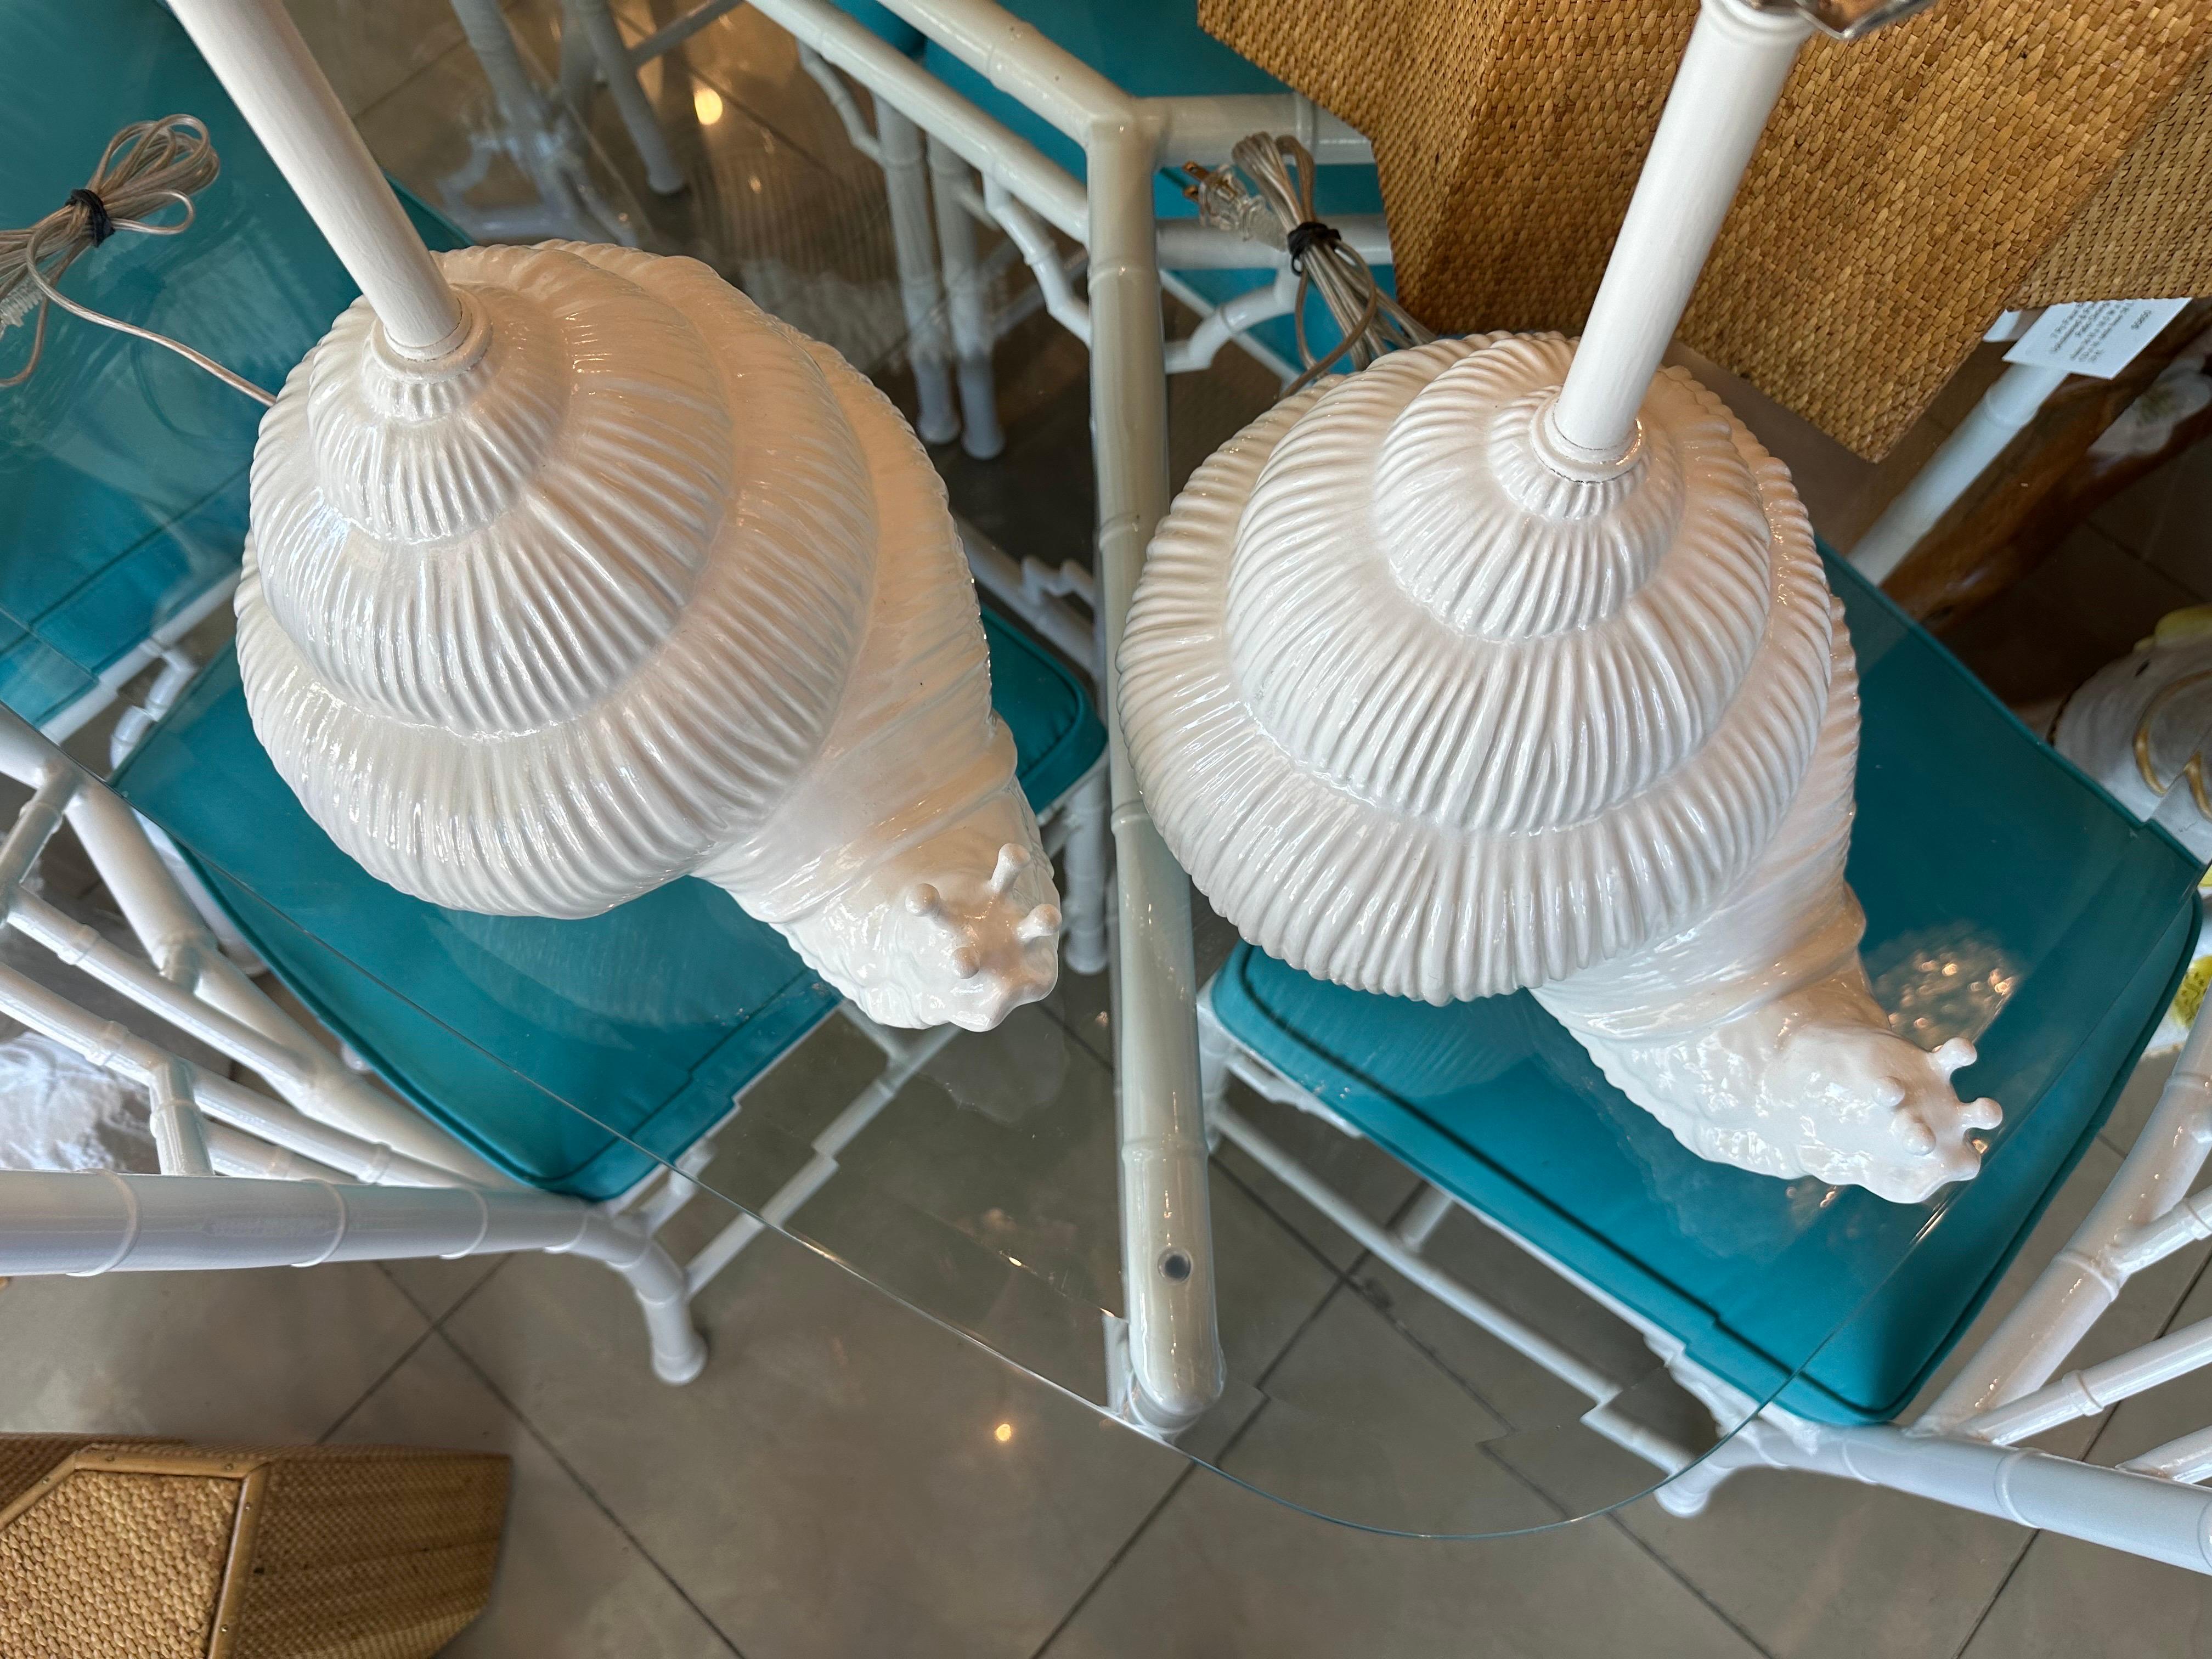 The cutest pair of vintage 1970s Italian ceramic snail lamps! Straight from Palm Beach. These have been newly wired, 3 way sockets, all new nickel hardware. No chips or breaks. Dimensions: 23 H (to top of finial) x 16.5 H (to top of lamp socket) x